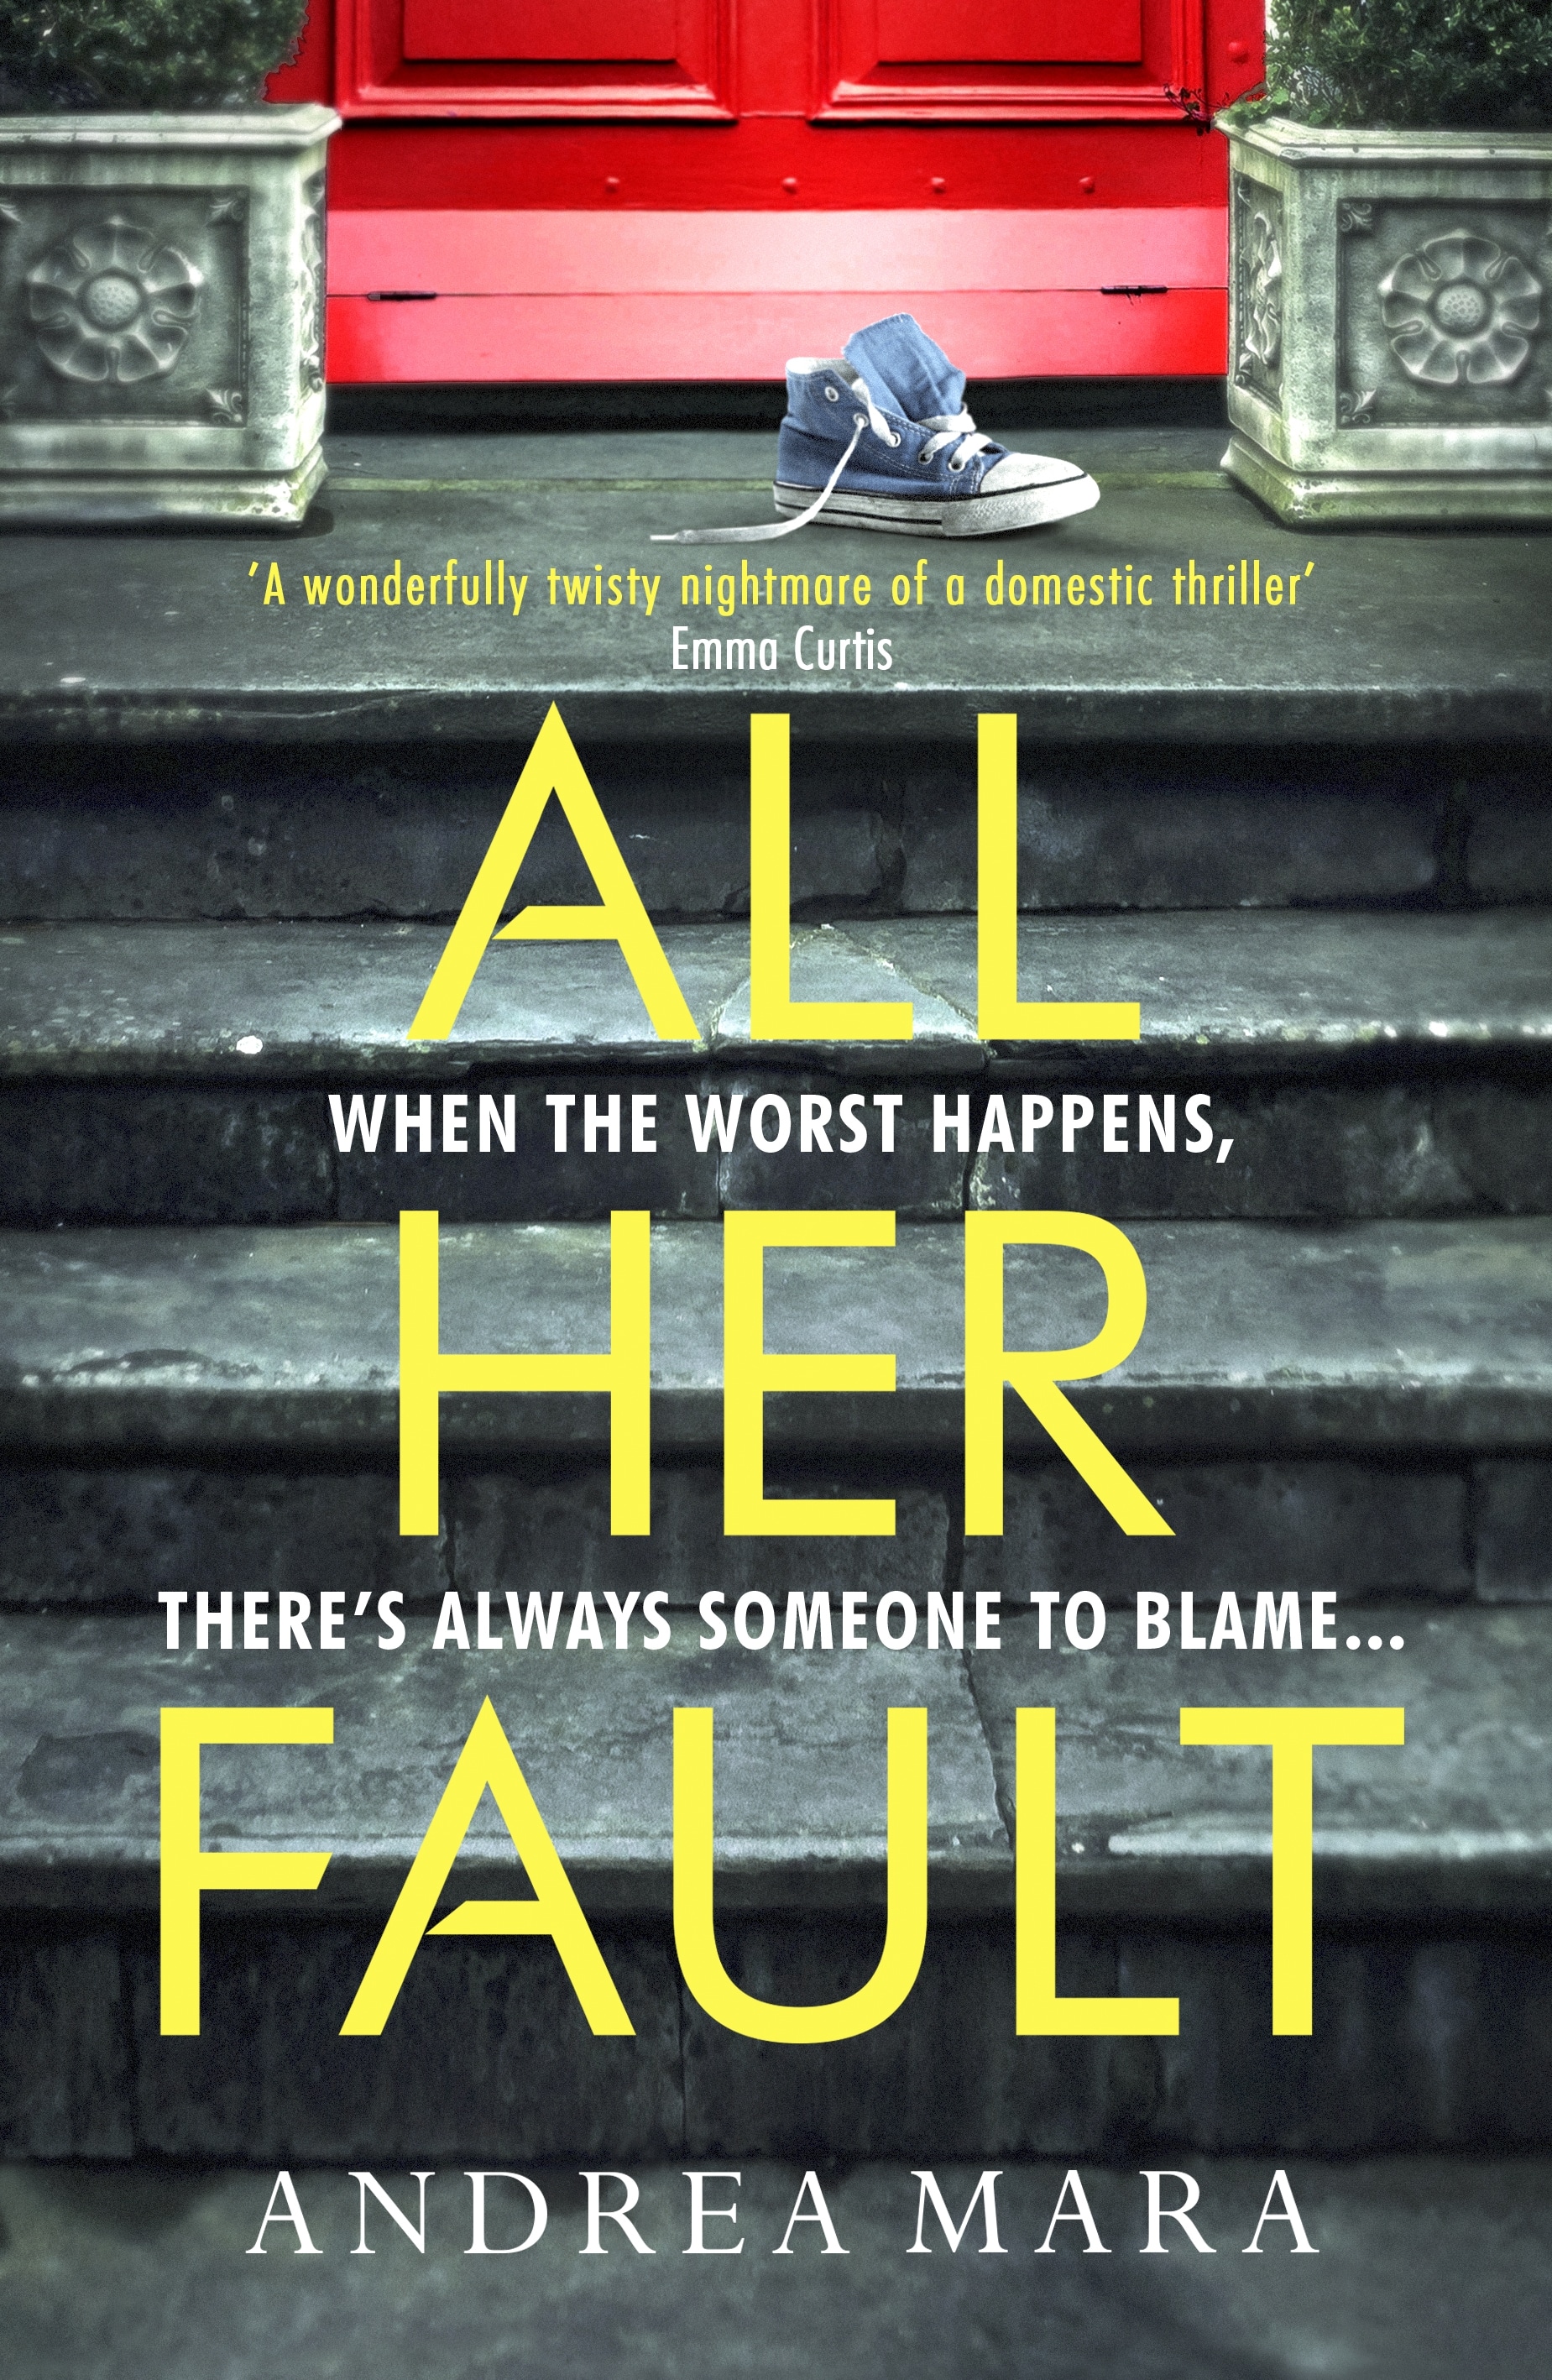 Book “All Her Fault” by Andrea Mara — July 22, 2021